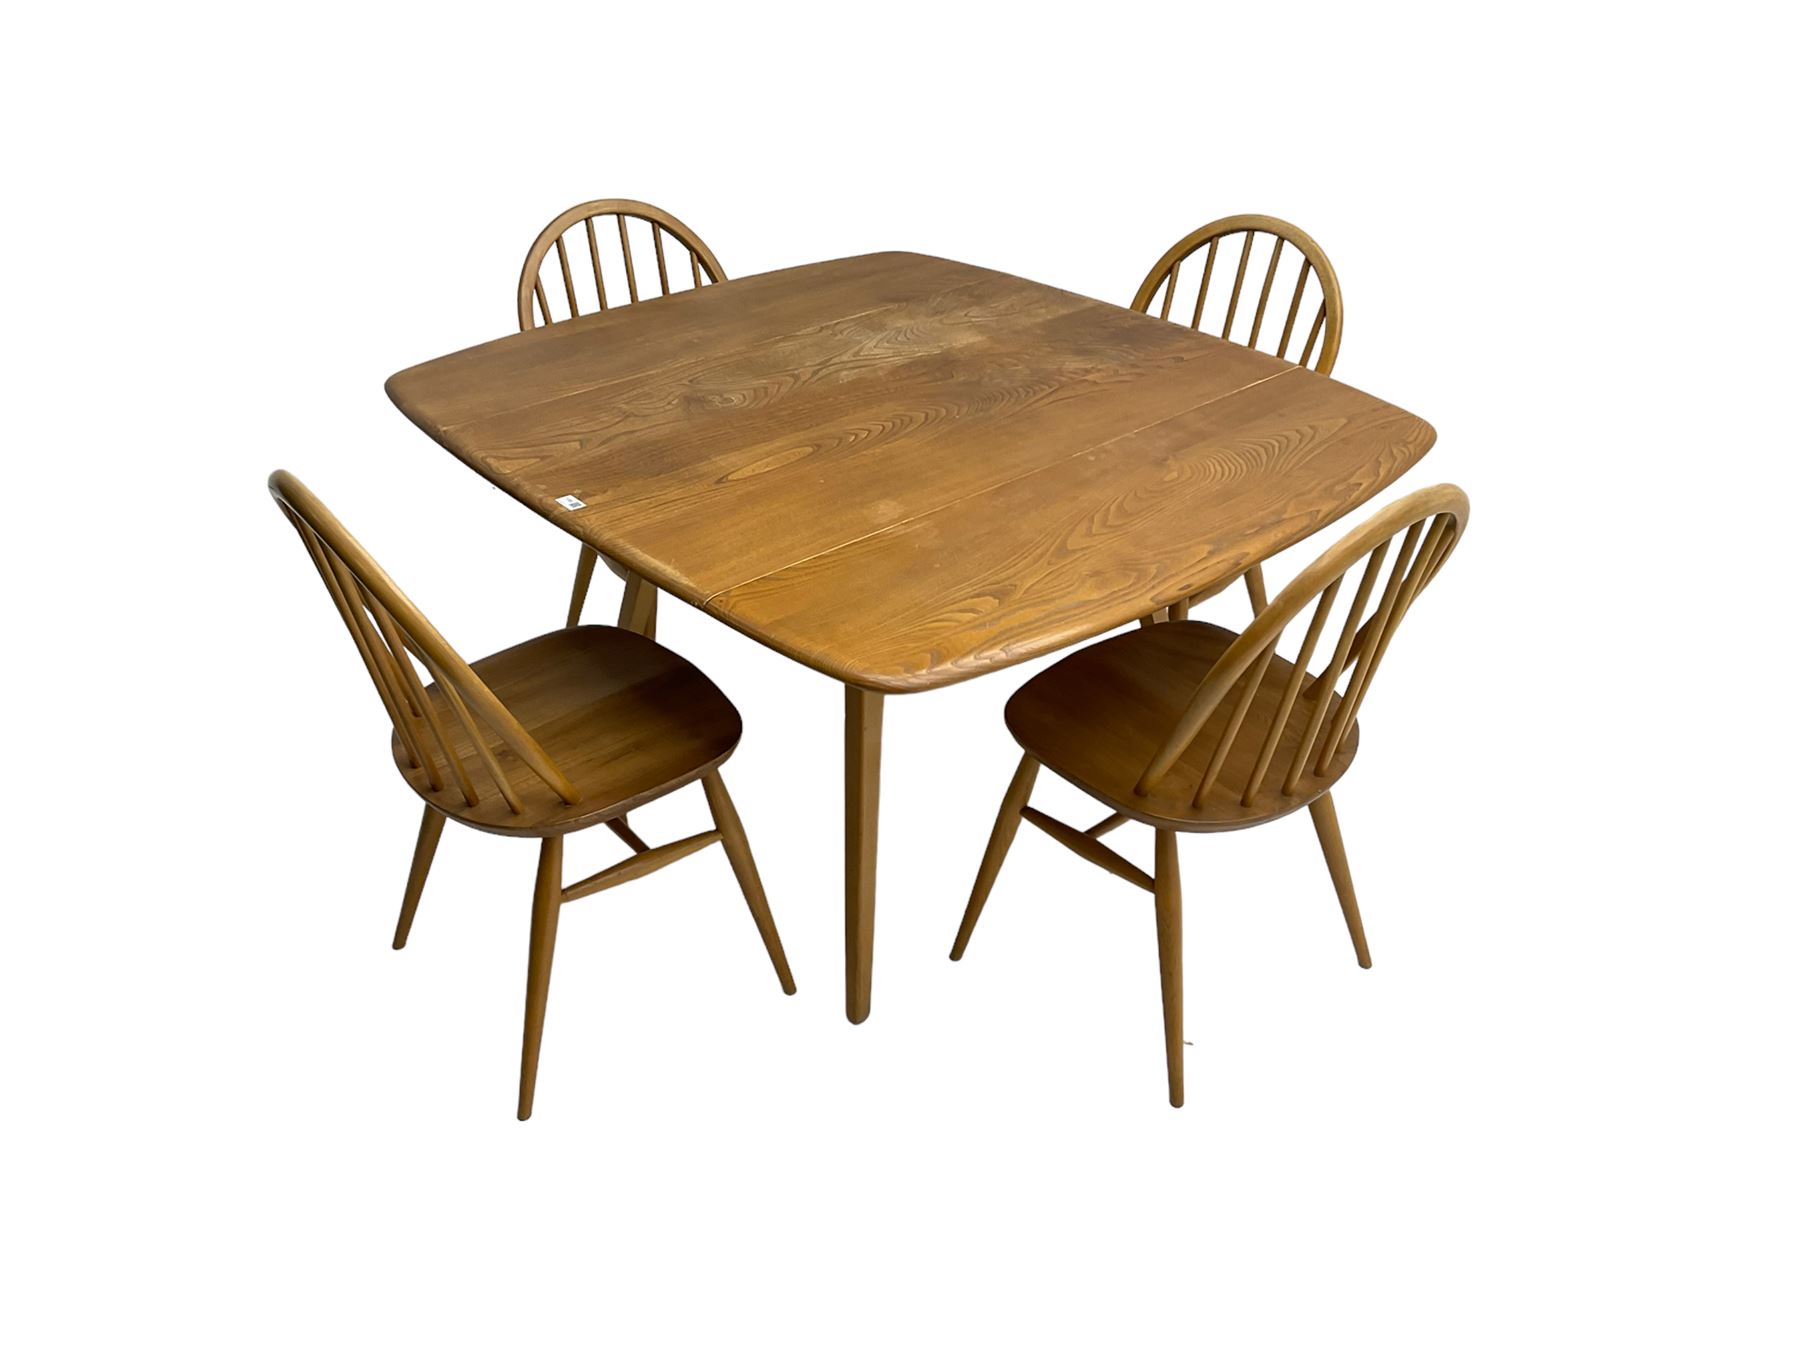 Ercol - elm and beech 'drop-leaf dining table' (W113cm - Image 6 of 6